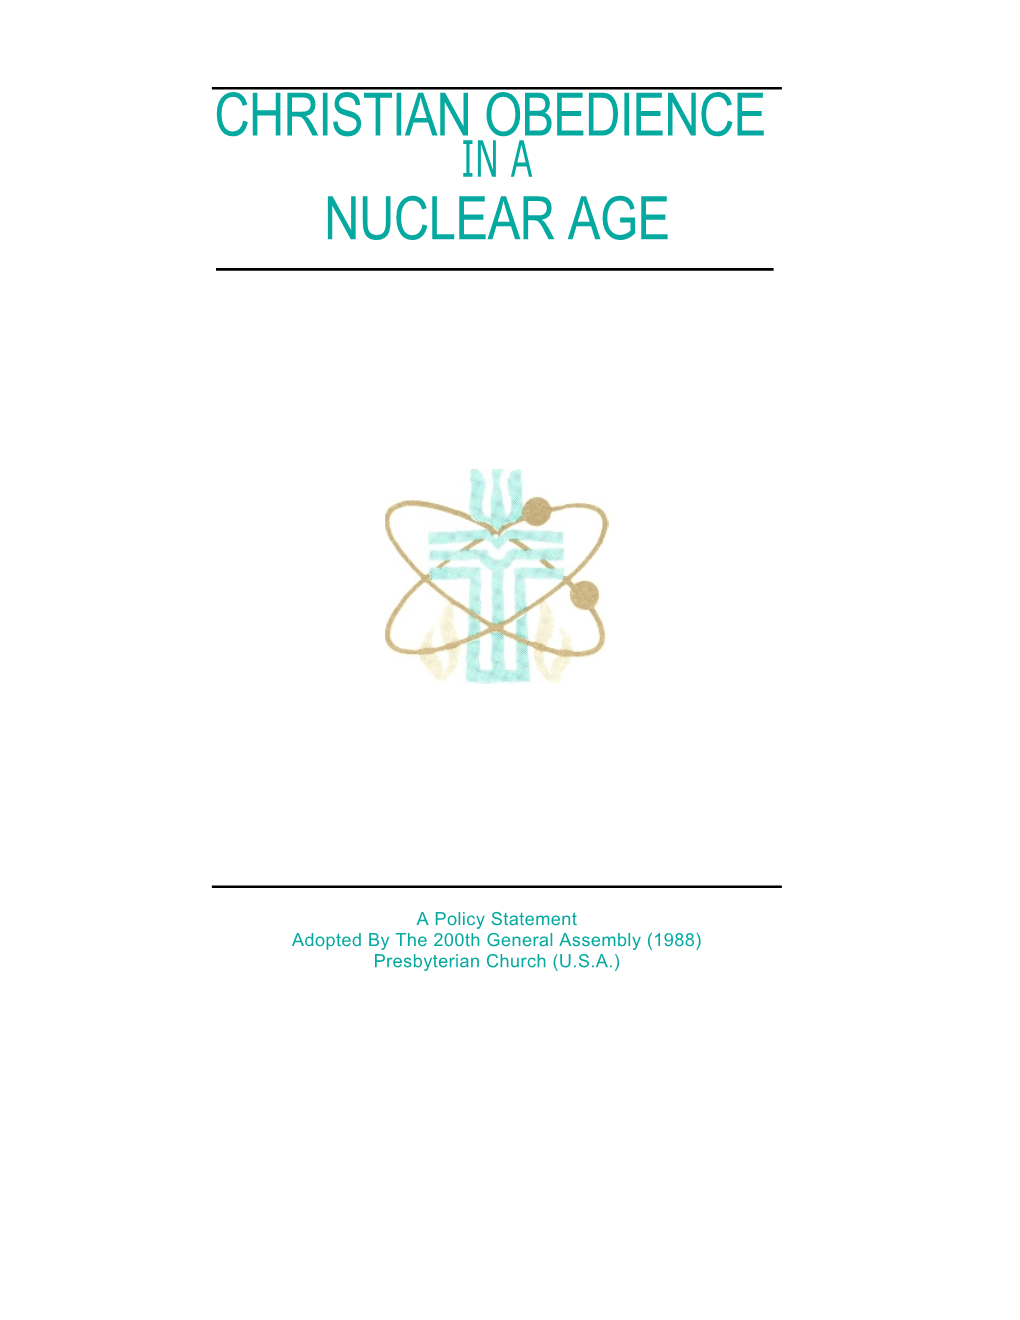 Christian Obedience in a Nuclear Age (1988)